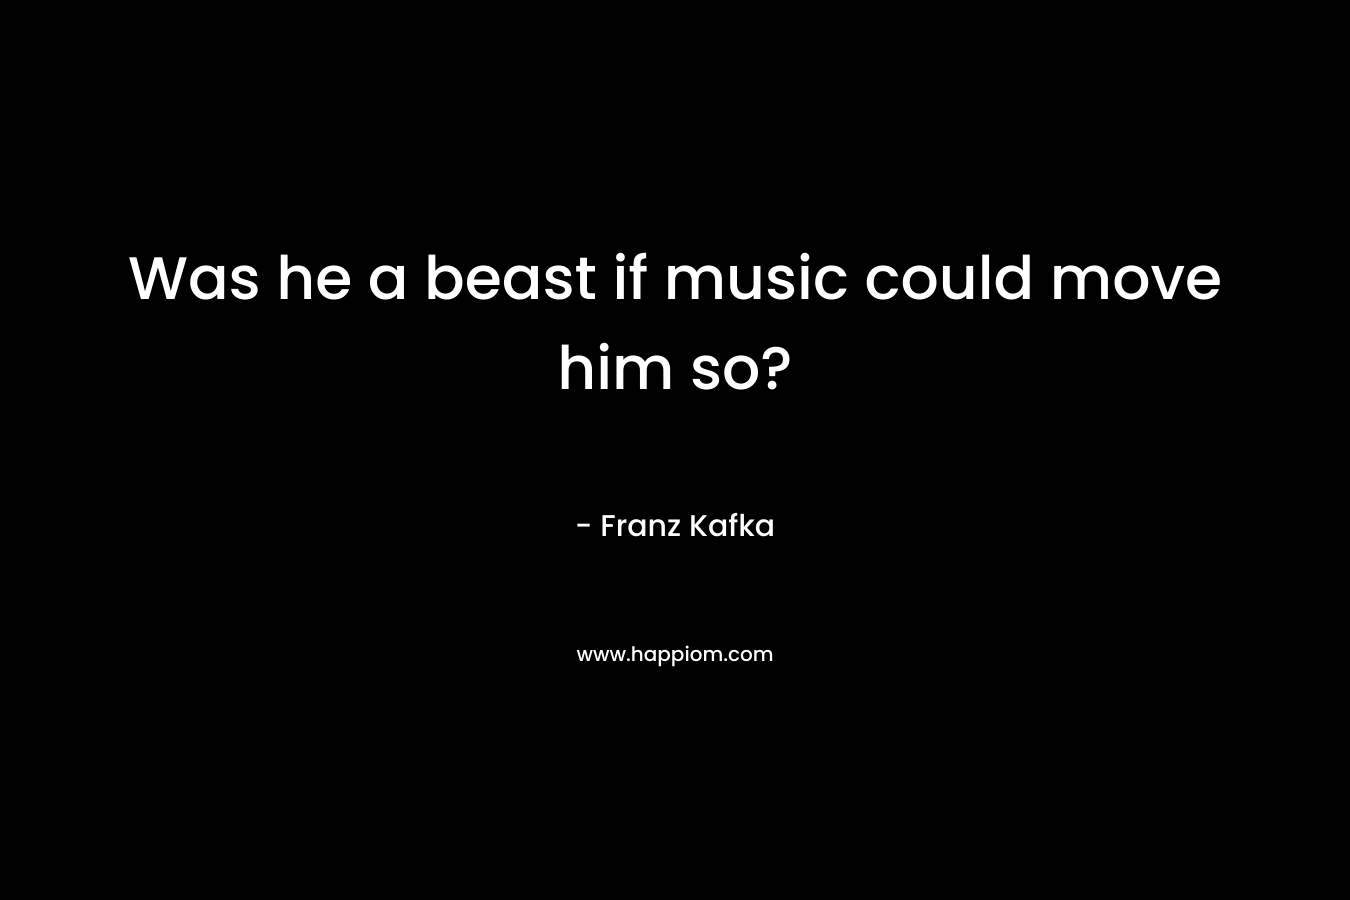 Was he a beast if music could move him so?